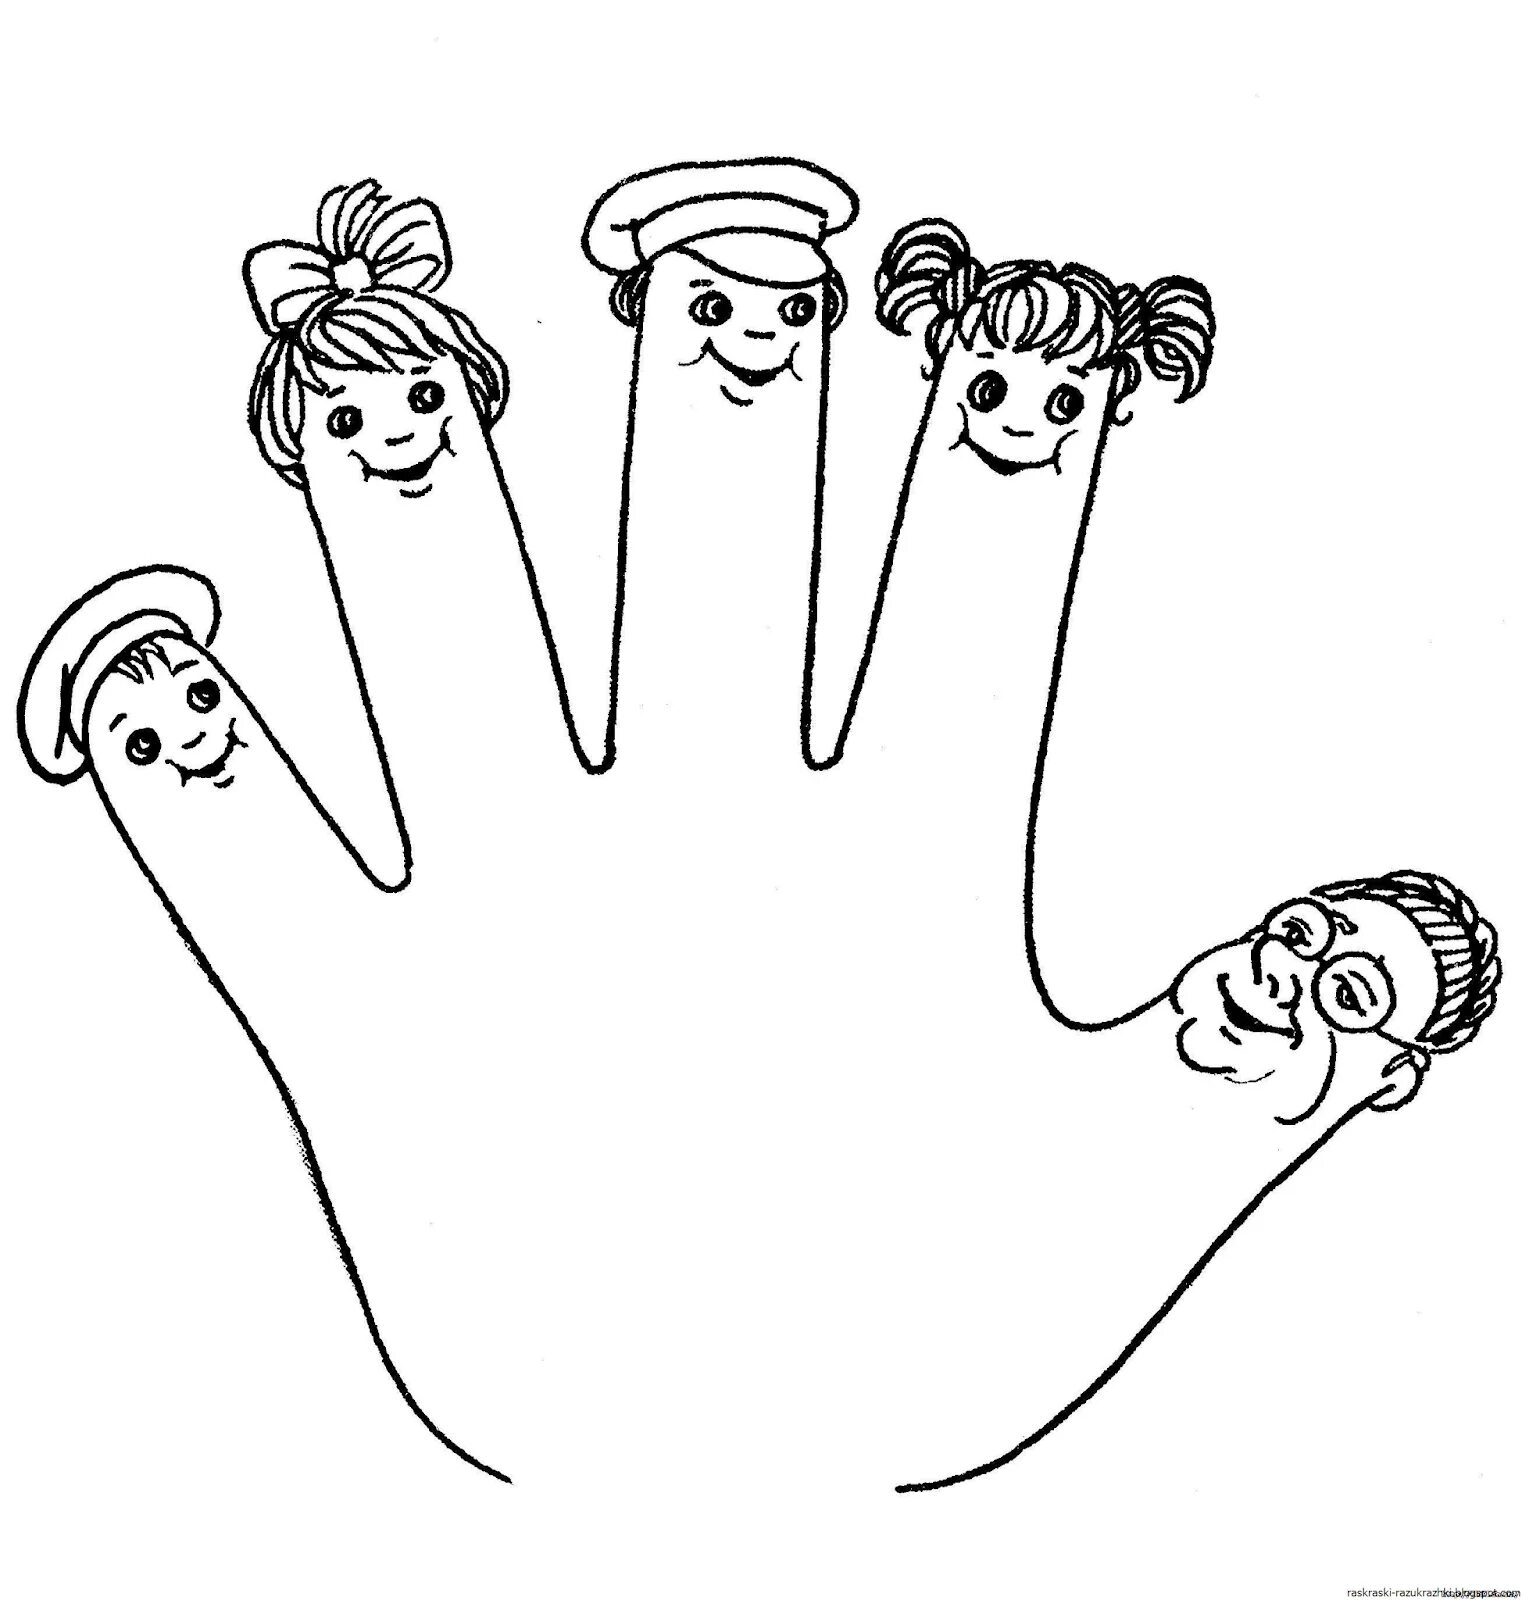 Color-party finger theater coloring page